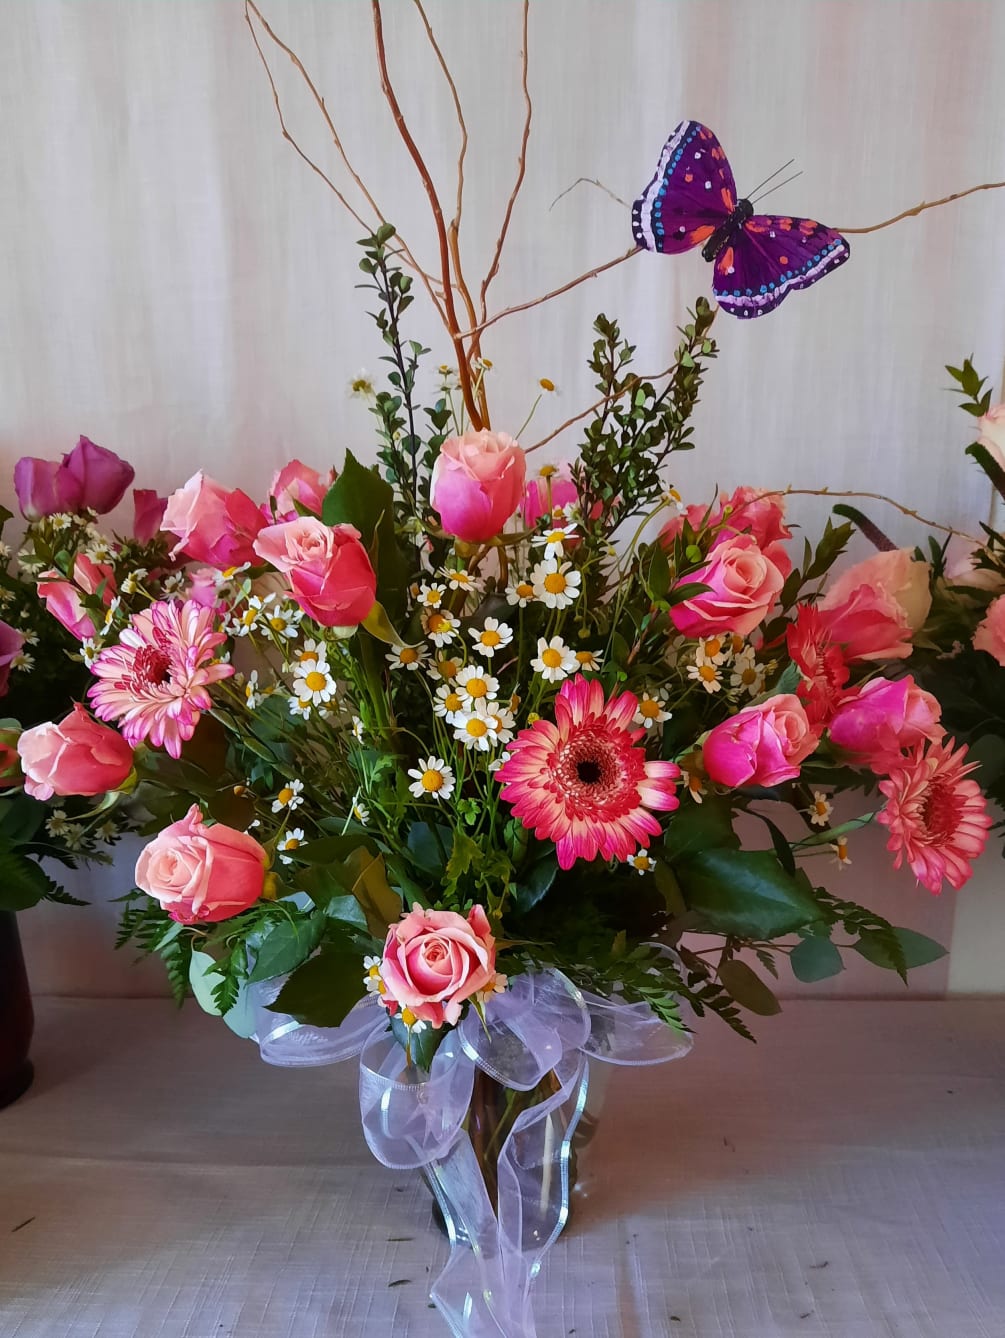 Two dozen beautiful pink roses adorned with decorative butterfly, willow wood and